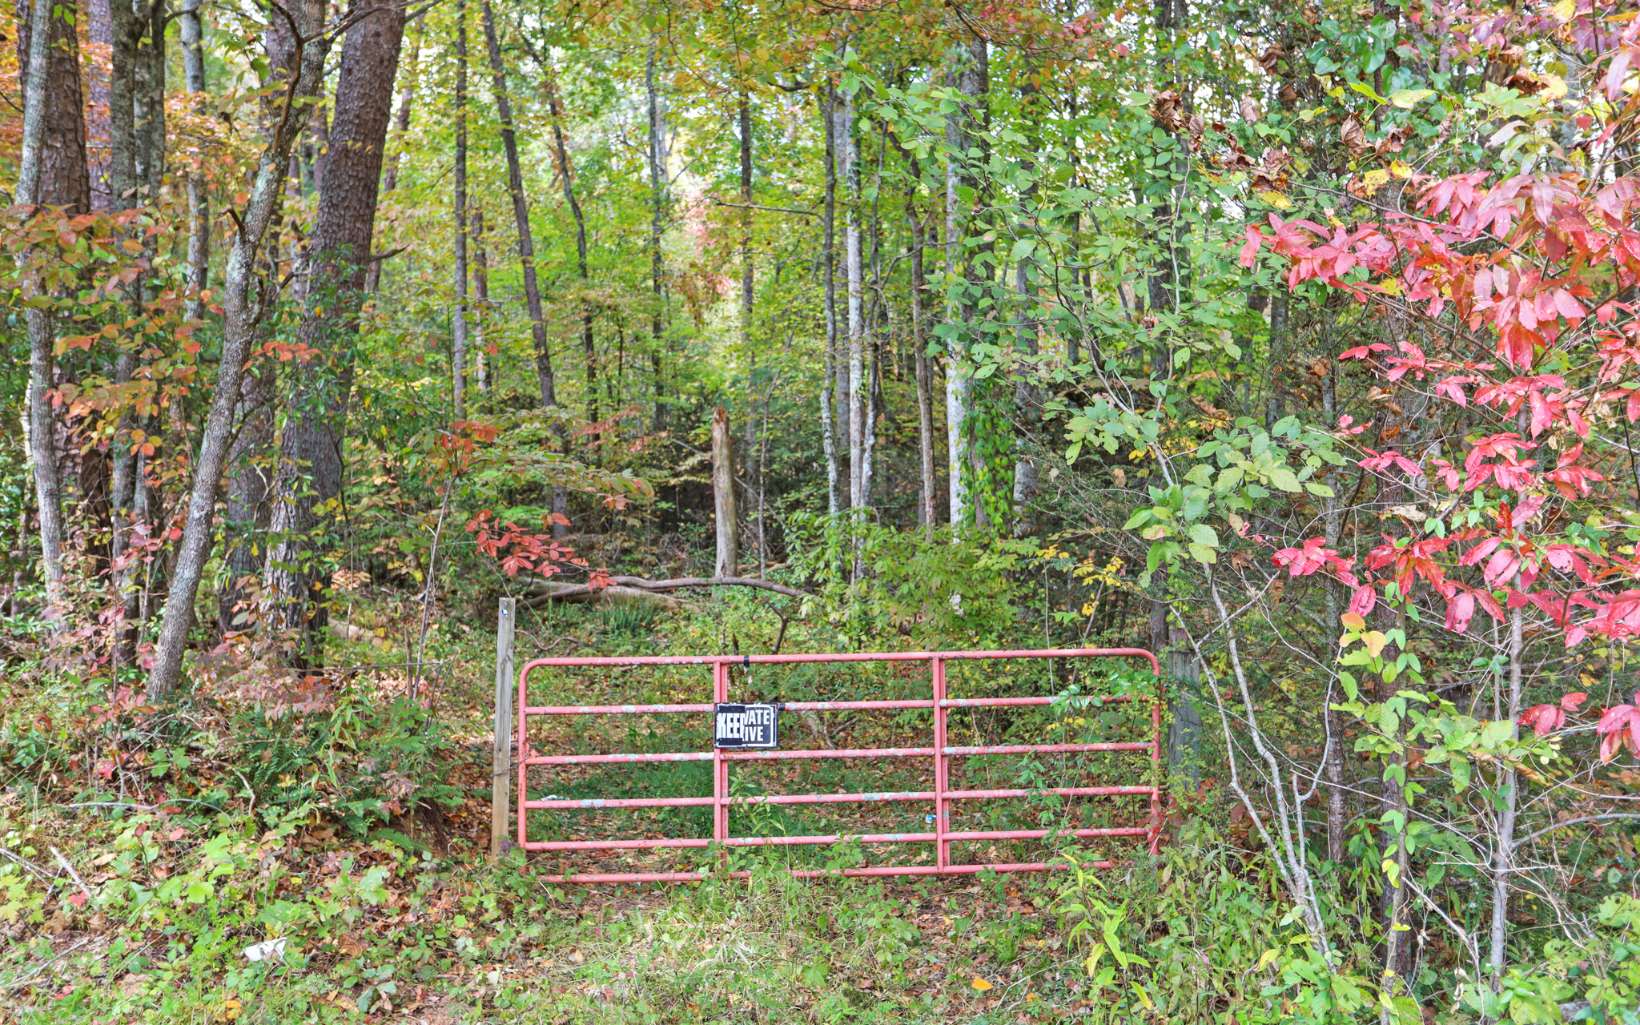 BRAND NEW SURVEY. Looking for your own private compound, this 63.36 acre tract is for you. Private with an array of different characteristic's. Great Location, Close to USFS, Blue Ridge Downtown, McCaysville, Toccoa River & Blue Ridge Lake. Large enough to hunt, sub-divide for family members or keep for your very own. Paved access to Gate, with 2 entrances you would be able to do most anything. Seasonal views, Property is in Conservation program and only 1 acre has very light restrictions (not the entire property). Recorded Easement to the property.